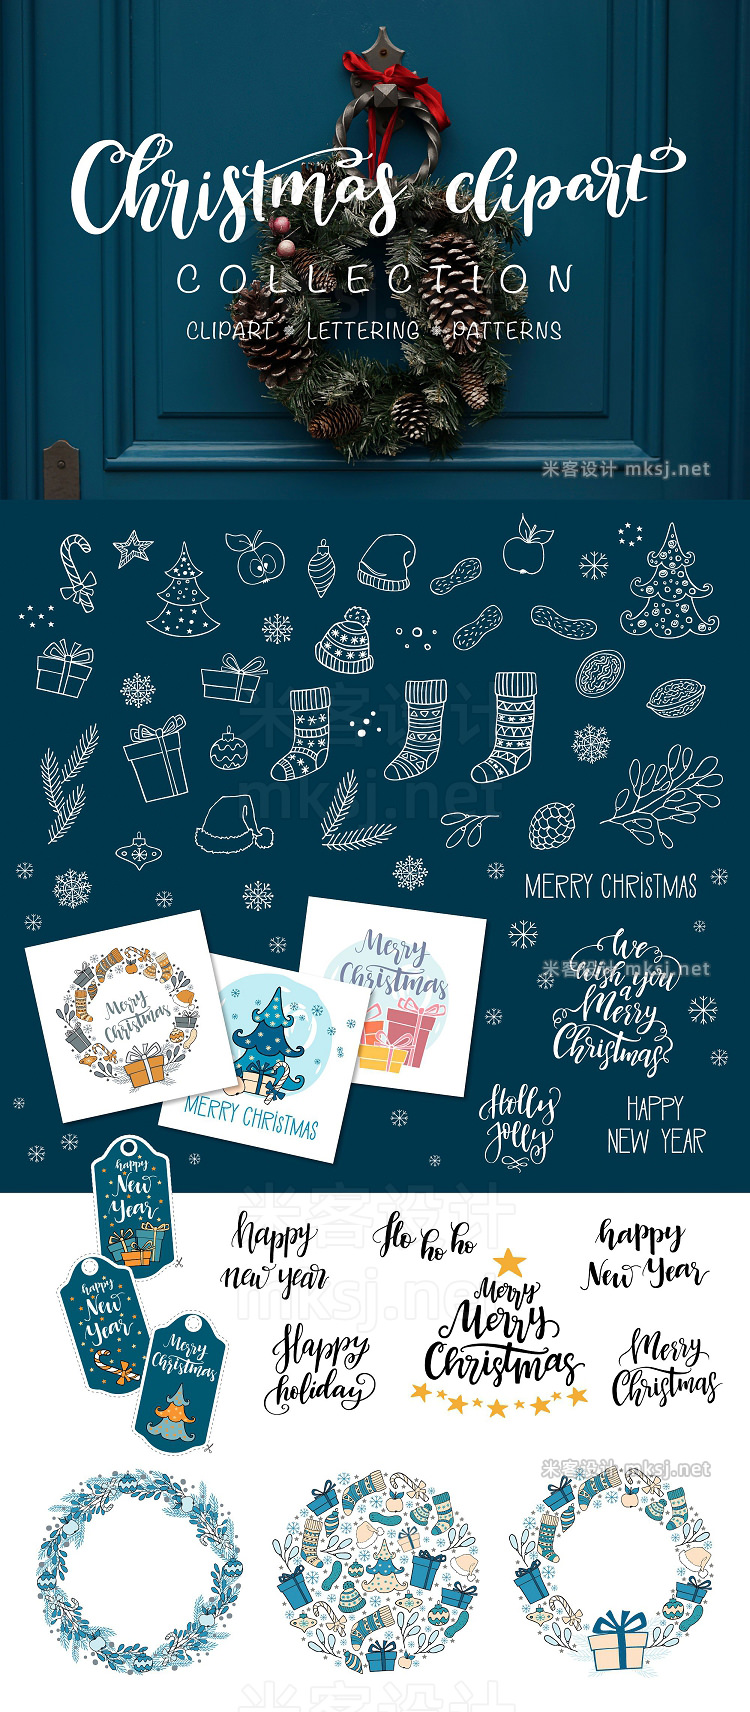 png素材 Christmas clipart collection